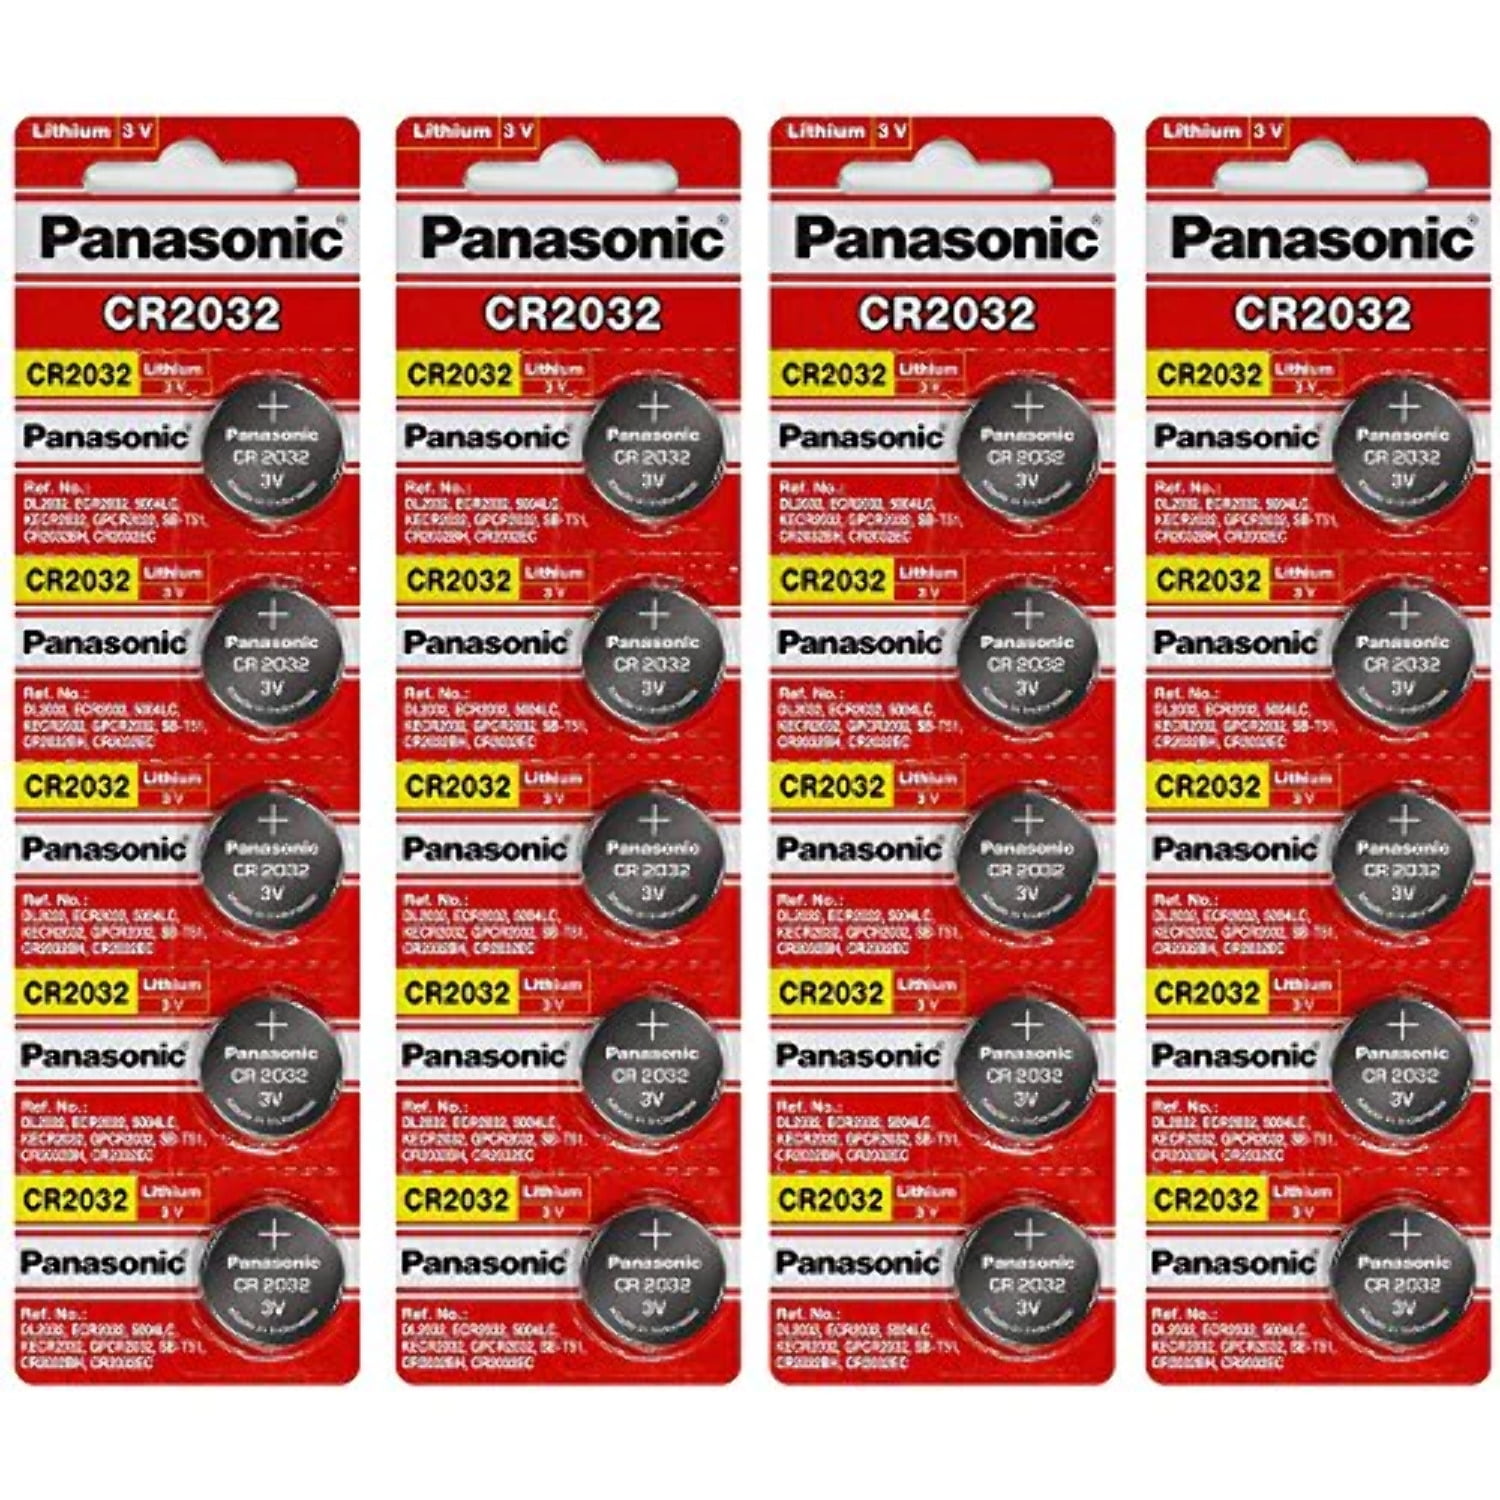 CR2032 Panasonic 3 Volt Lithium Coin Cell Battery